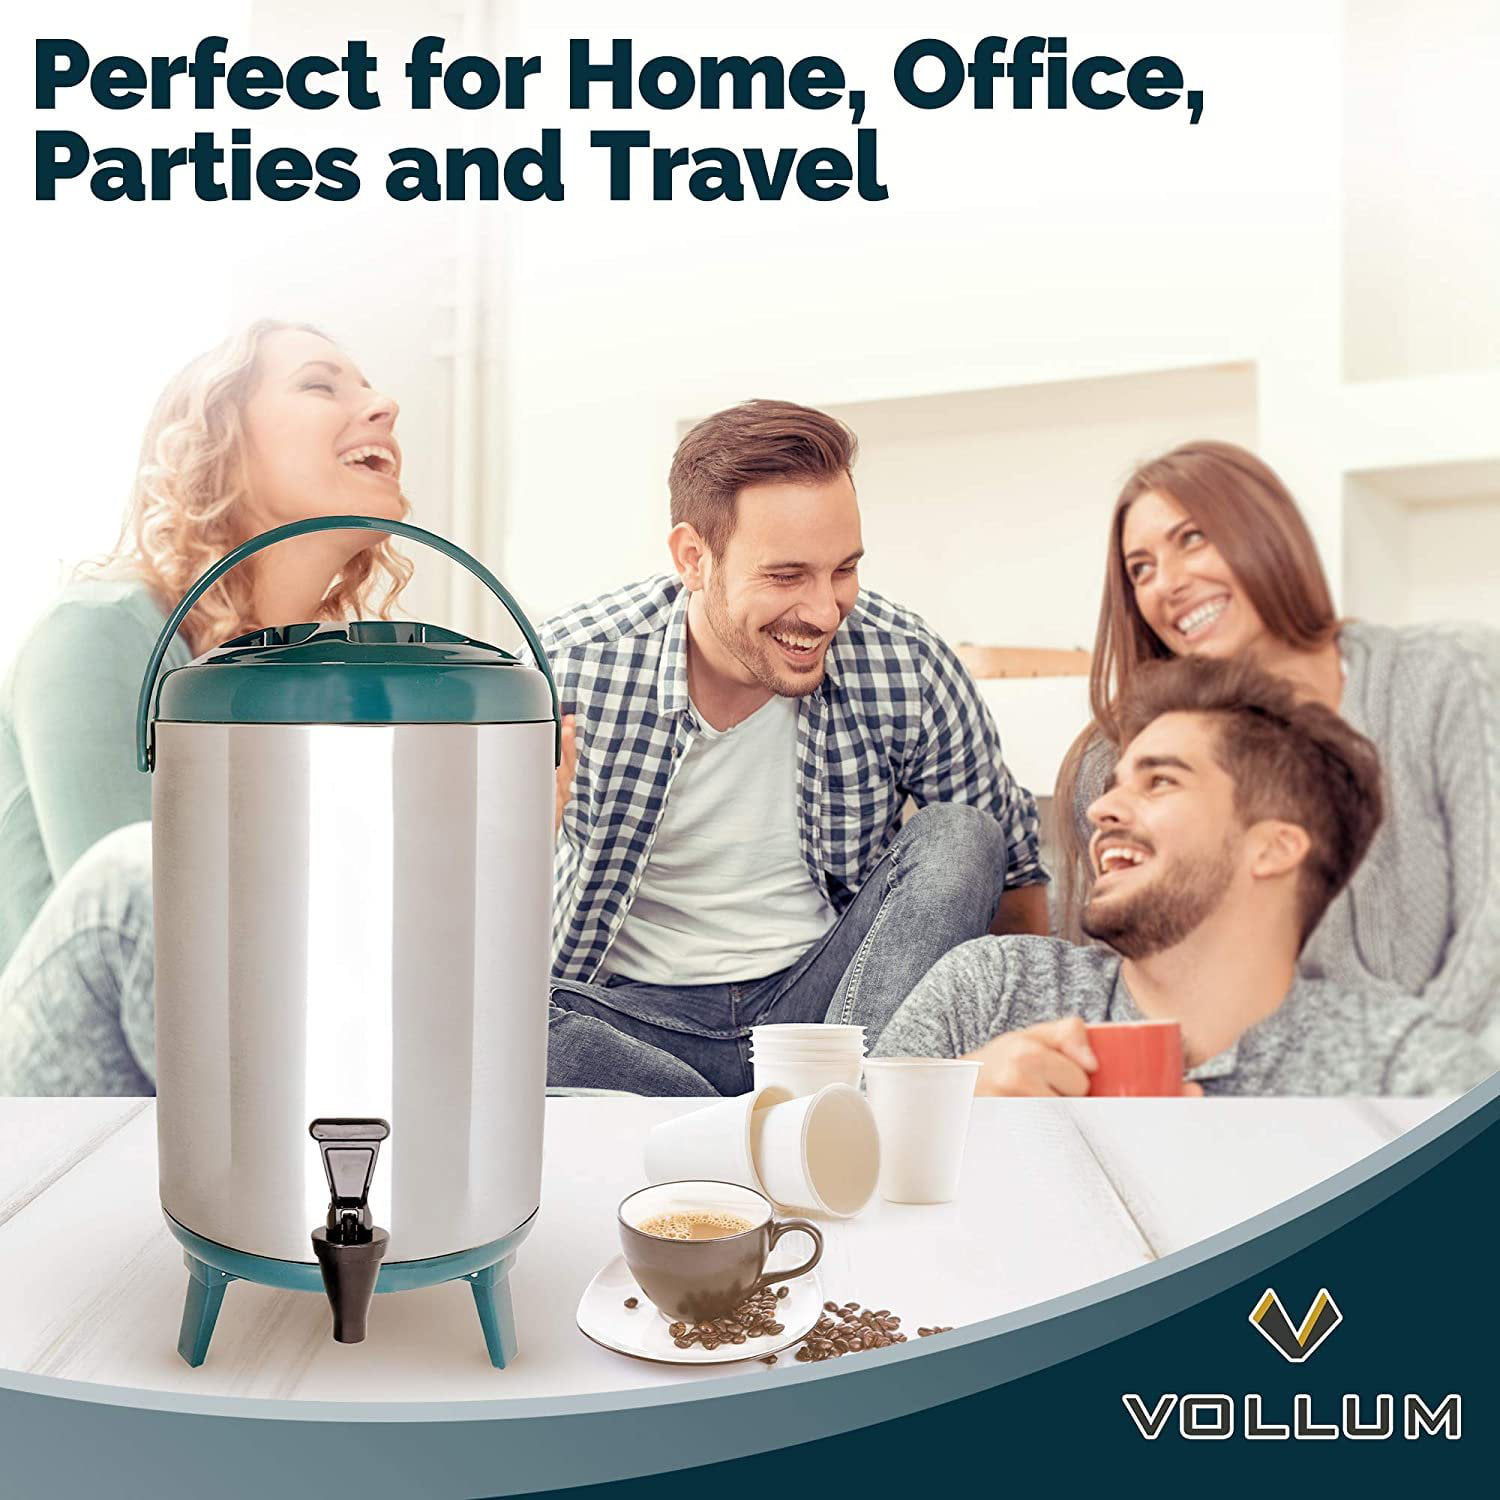 Stainless Steel Insulated Beverage Coffee Dispenser 12  Liter/3.1 Gallon Party Insulated Thermal Hot and Cold Beverage Dispenser  for Serving Halloween Tea, Coffee, Milk, Water, Juice, Soup: Iced Beverage  Dispensers